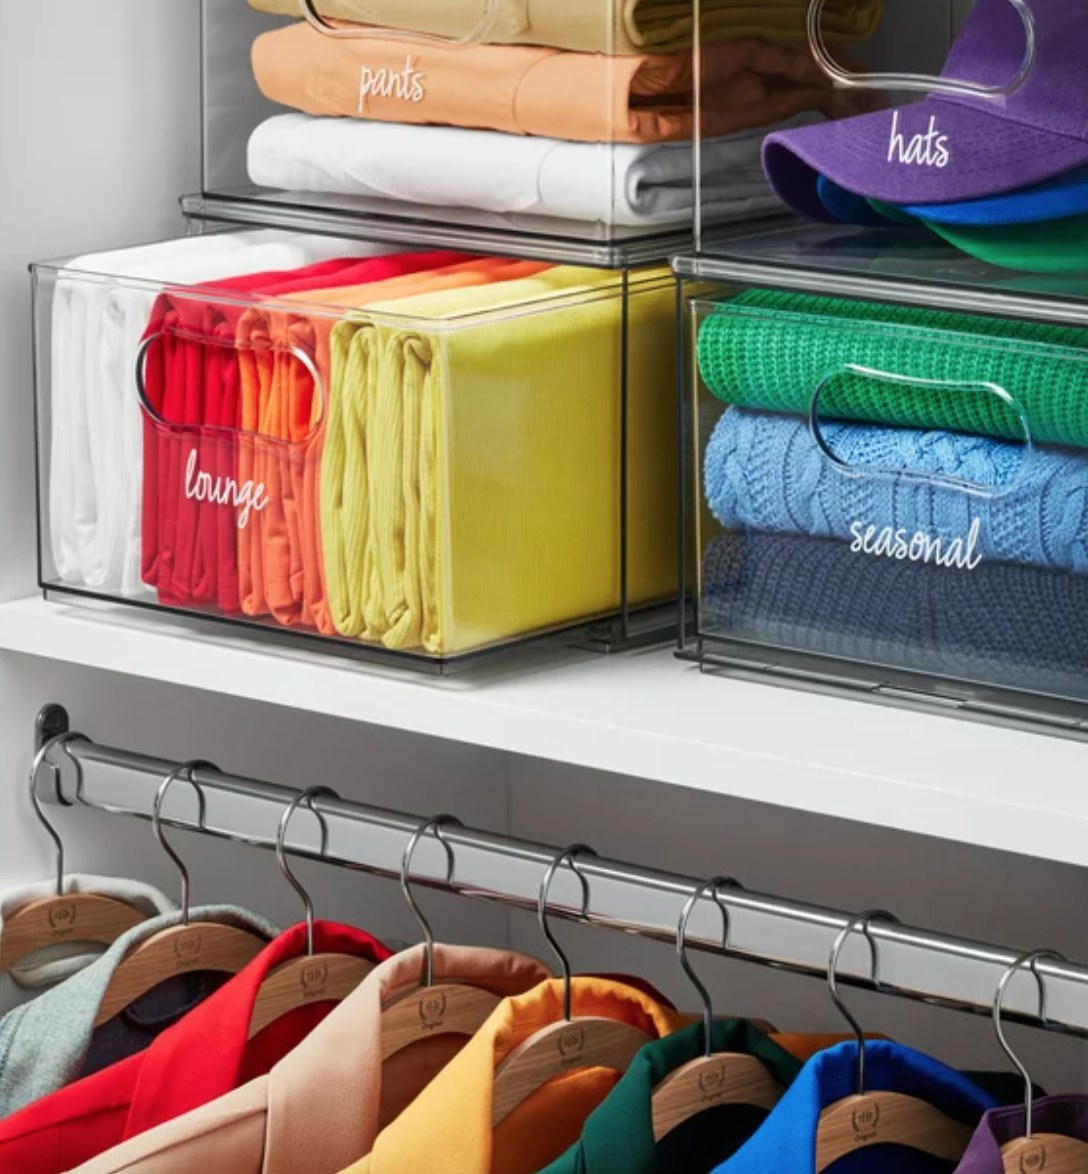 clear storage bins filled with folded clothes in a closet